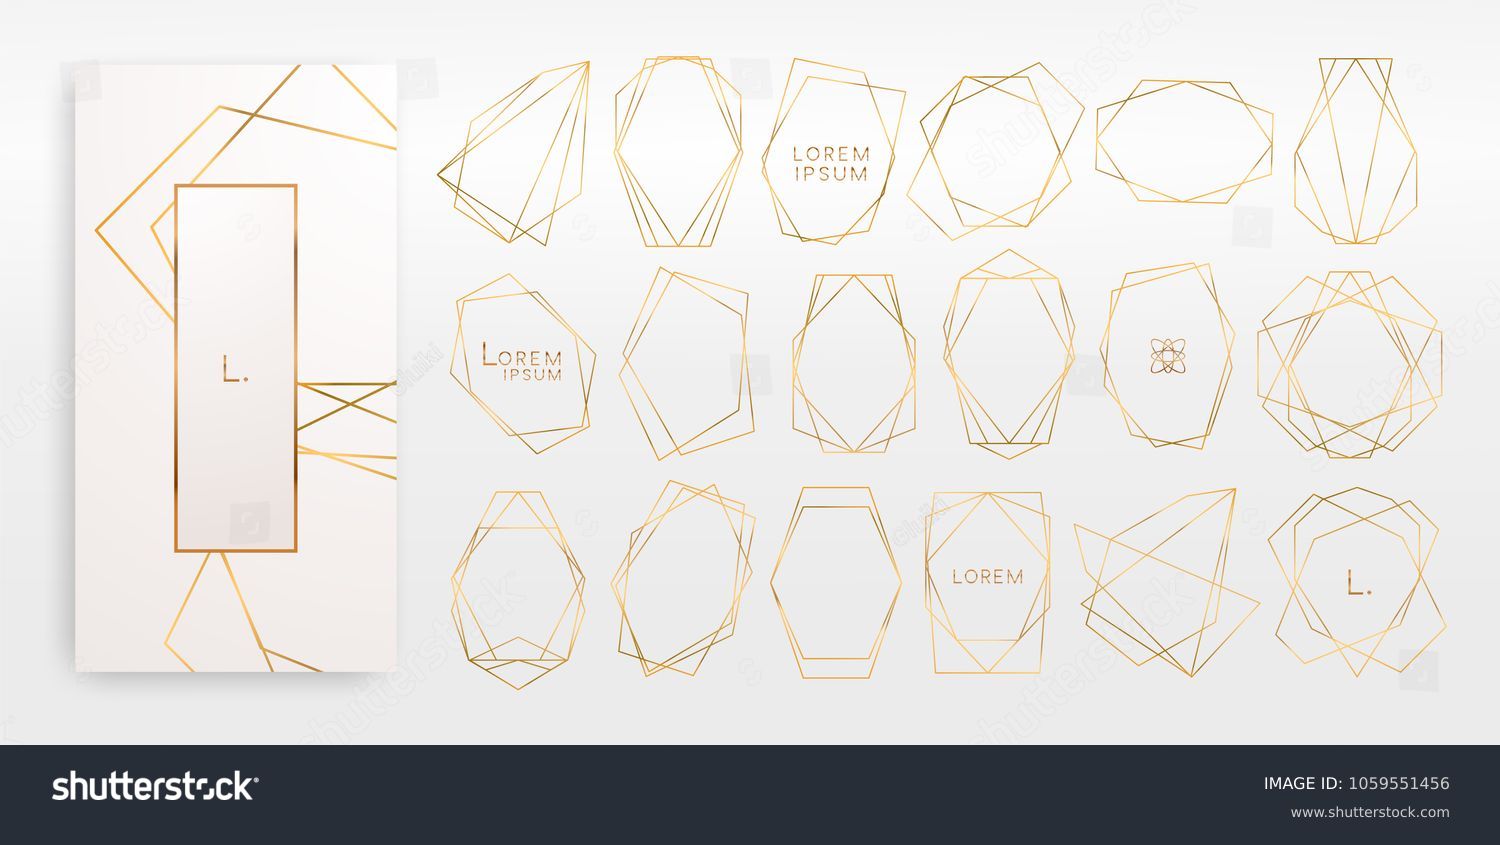 Gold collection of geometrical polyhedron, art deco style for wedding invitation, luxury templates, decorative patterns,... Modern abstract elements, vector illustration, isolated on backgrounds. #1059551456